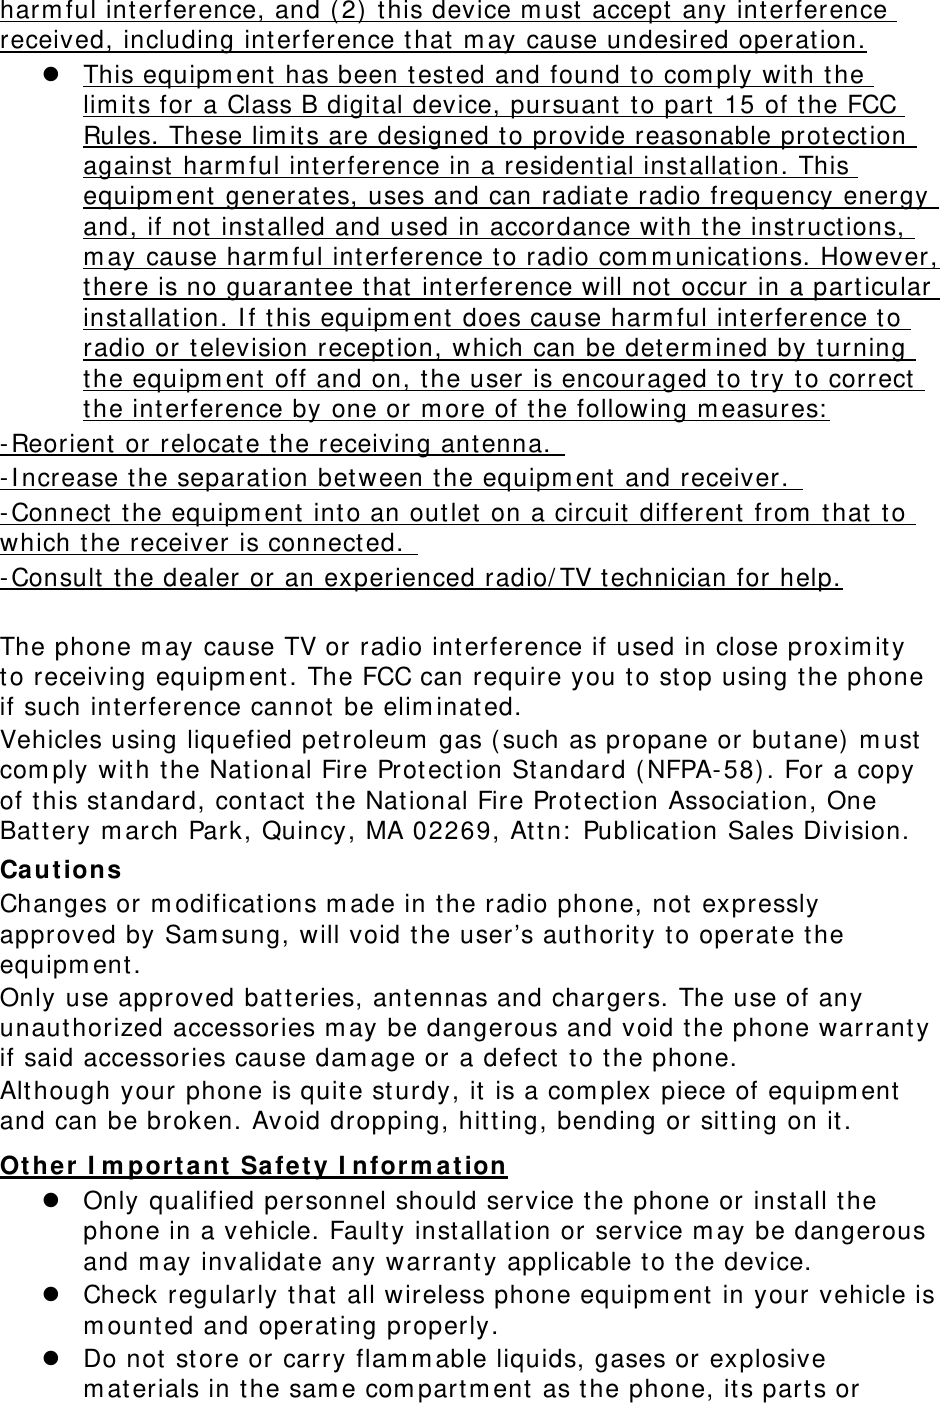 harm ful interference, and ( 2) t his device m ust accept  any interference received, including interference that m ay cause undesired operation.  This equipm ent  has been t ested and found to com ply with t he lim its for a Class B digit al device, pursuant  t o part  15 of the FCC Rules. These lim its are designed t o provide reasonable protection against  harm ful interference in a resident ial inst allat ion. This equipm ent generat es, uses and can radiate radio frequency energy and, if not inst alled and used in accordance with t he inst ruct ions, m ay cause harm ful int erference to radio com m unicat ions. However, there is no guarantee that int erference will not occur in a particular inst allation. I f this equipm ent does cause harm ful int erference to radio or television recept ion, which can be determ ined by t urning the equipm ent off and on, the user is encouraged to try to correct  the interference by one or m ore of the following m easures:  - Reorient  or relocate t he receiving ant enna.   - I ncrease the separat ion between the equipm ent and receiver.   - Connect  the equipm ent  into an out let on a circuit  different from  that t o which the receiver is connected.   - Consult  the dealer or an experienced radio/ TV t echnician for help.  The phone m ay cause TV or radio interference if used in close proxim ity to receiving equipm ent . The FCC can require you to st op using t he phone if such interference cannot be elim inated. Vehicles using liquefied petroleum  gas ( such as propane or but ane)  m ust com ply wit h t he National Fire Protection St andard ( NFPA- 58) . For a copy of this st andard, contact  the Nat ional Fire Protection Associat ion, One Batt ery m arch Park, Quincy, MA 02269, At tn:  Publication Sales Division. Ca ut ions Changes or m odifications m ade in t he radio phone, not expressly approved by Sam sung, will void the user’s authority to operate the equipm ent. Only use approved bat teries, ant ennas and chargers. The use of any unauthorized accessories m ay be dangerous and void t he phone warranty if said accessories cause dam age or a defect  to the phone. Although your phone is quit e st urdy, it  is a com plex piece of equipm ent and can be broken. Avoid dropping, hit ting, bending or sitt ing on it . Ot her I m por ta nt Sa fe ty I nfor m at ion  Only qualified personnel should service the phone or inst all the phone in a vehicle. Fault y inst allation or service m ay be dangerous and m ay invalidate any warranty applicable to the device.  Check regularly t hat all wireless phone equipm ent in your vehicle is m ount ed and operating properly.  Do not st ore or carry flam m able liquids, gases or explosive m aterials in t he sam e com partm ent as t he phone, it s parts or 